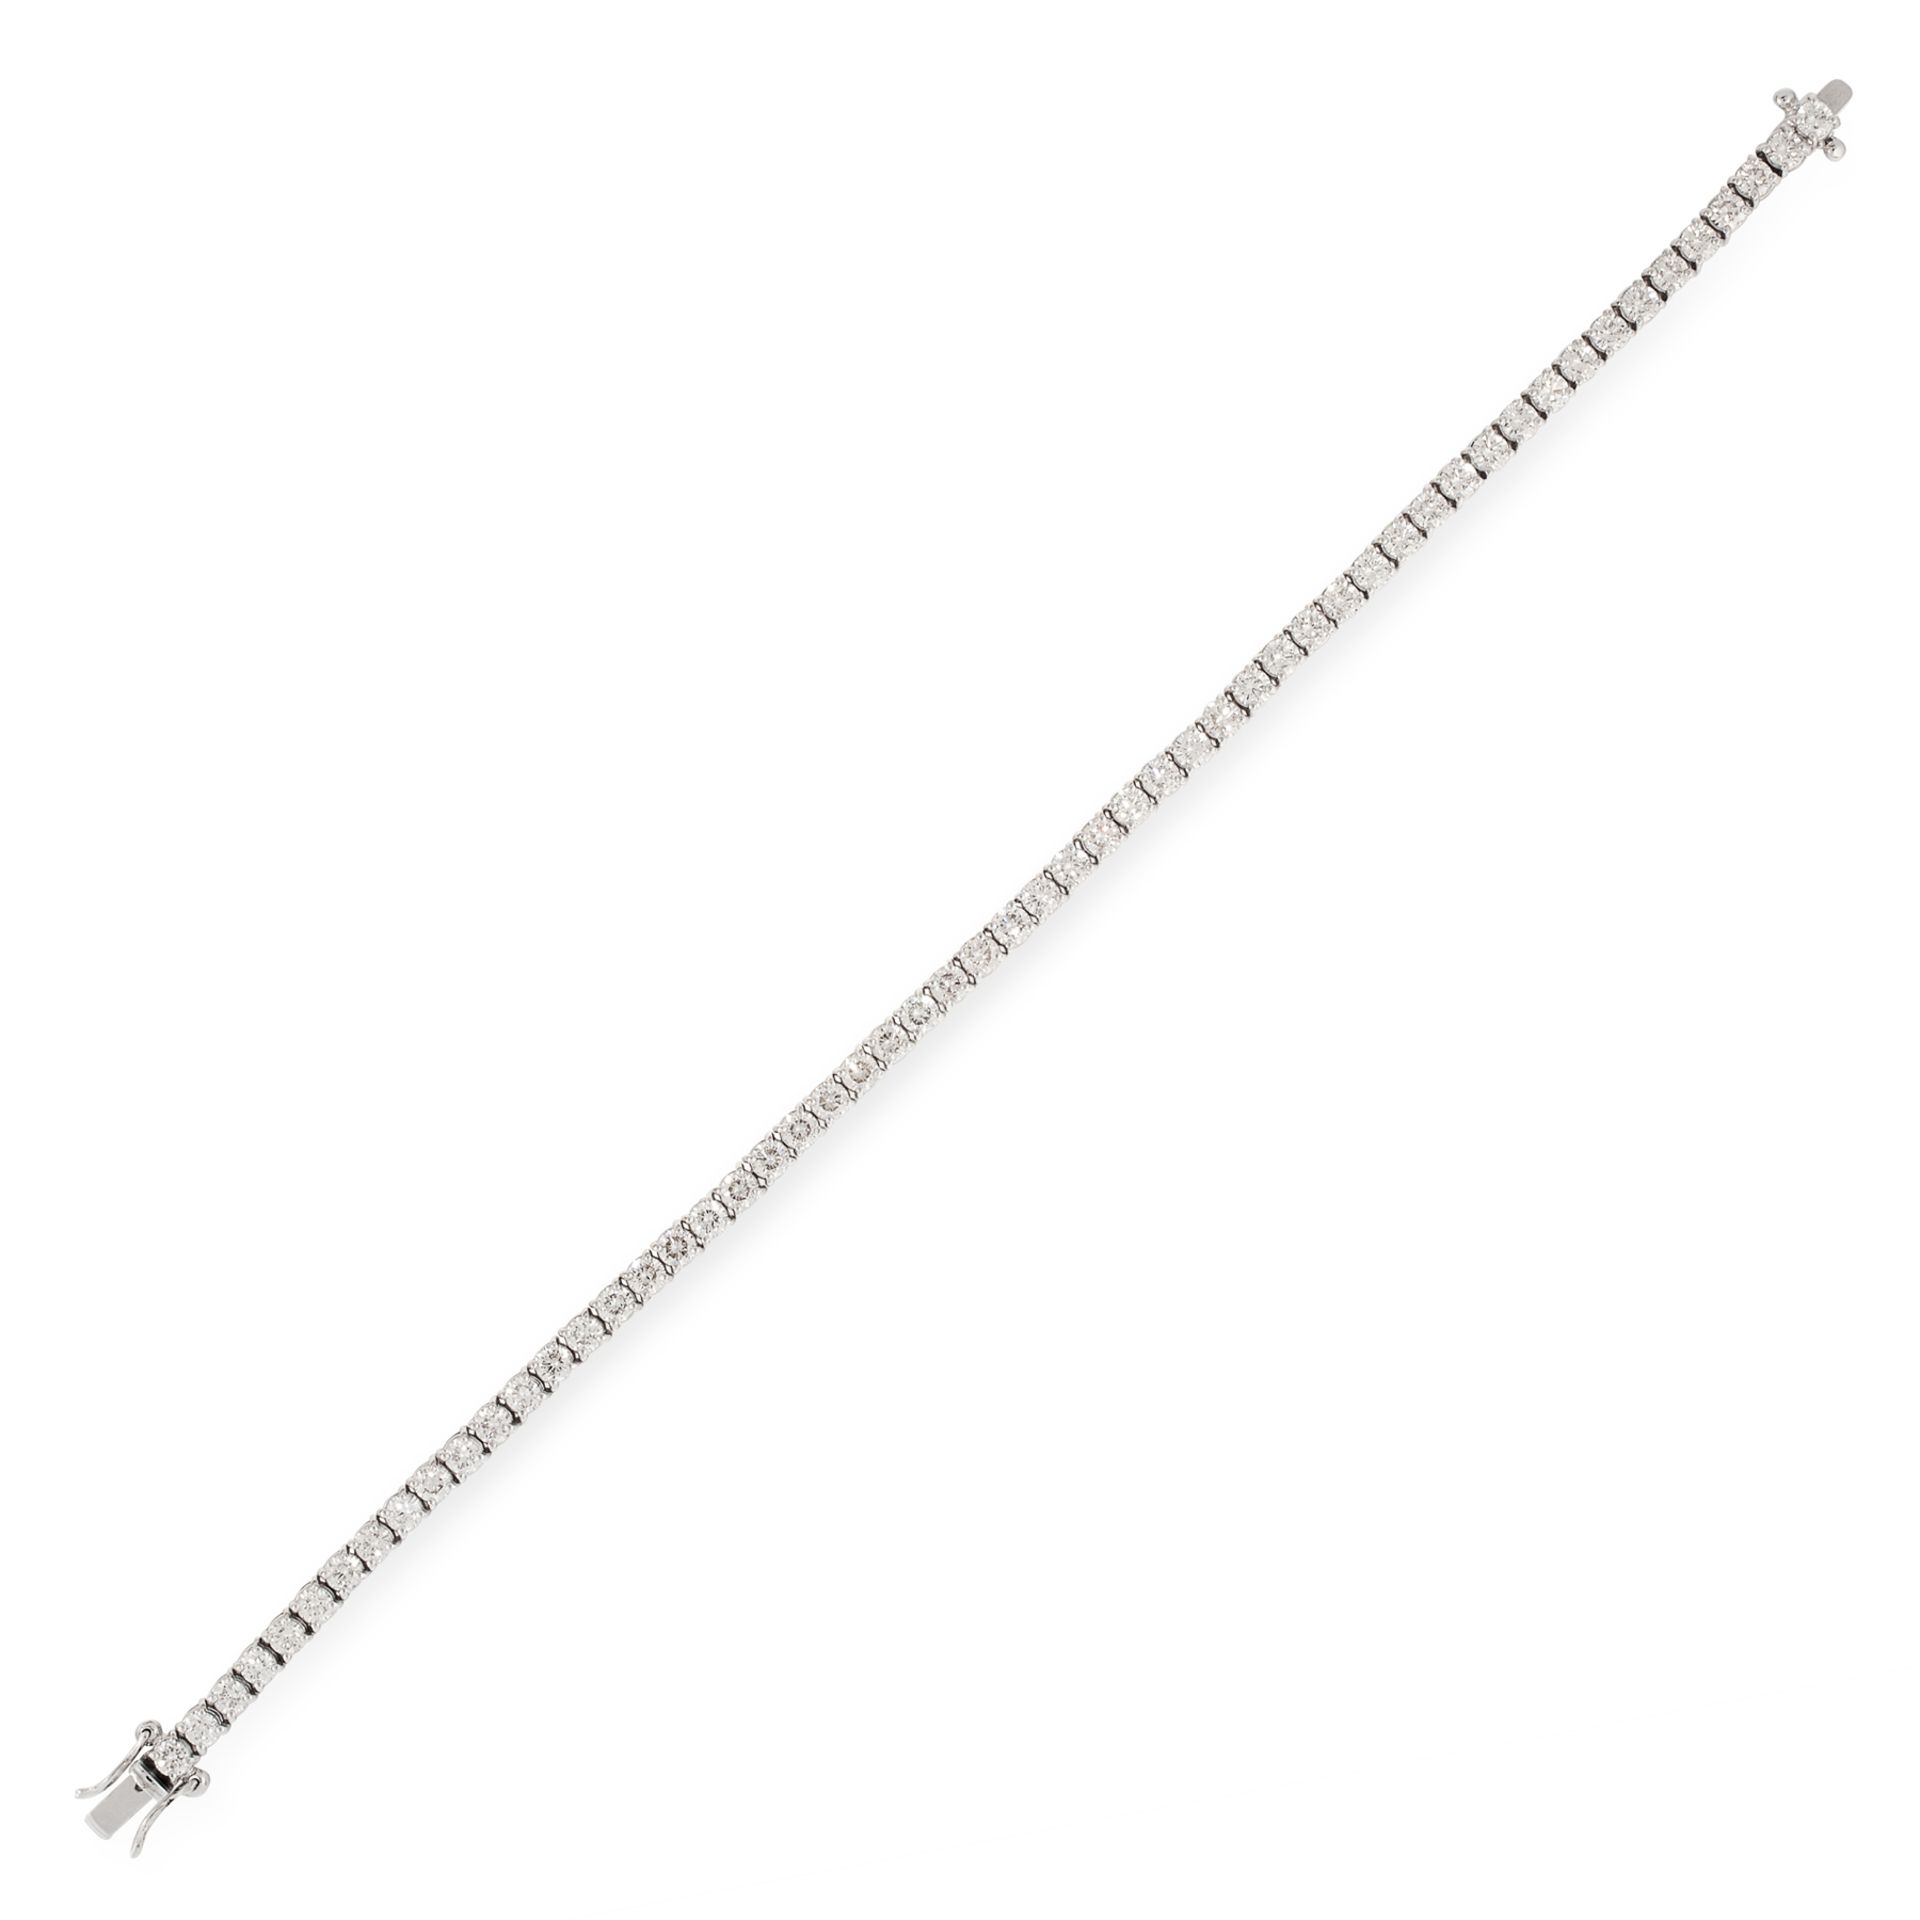 A 4.97 CARAT DIAMOND LINE BRACELET in 18ct white gold, comprising a single row of sixty-one round